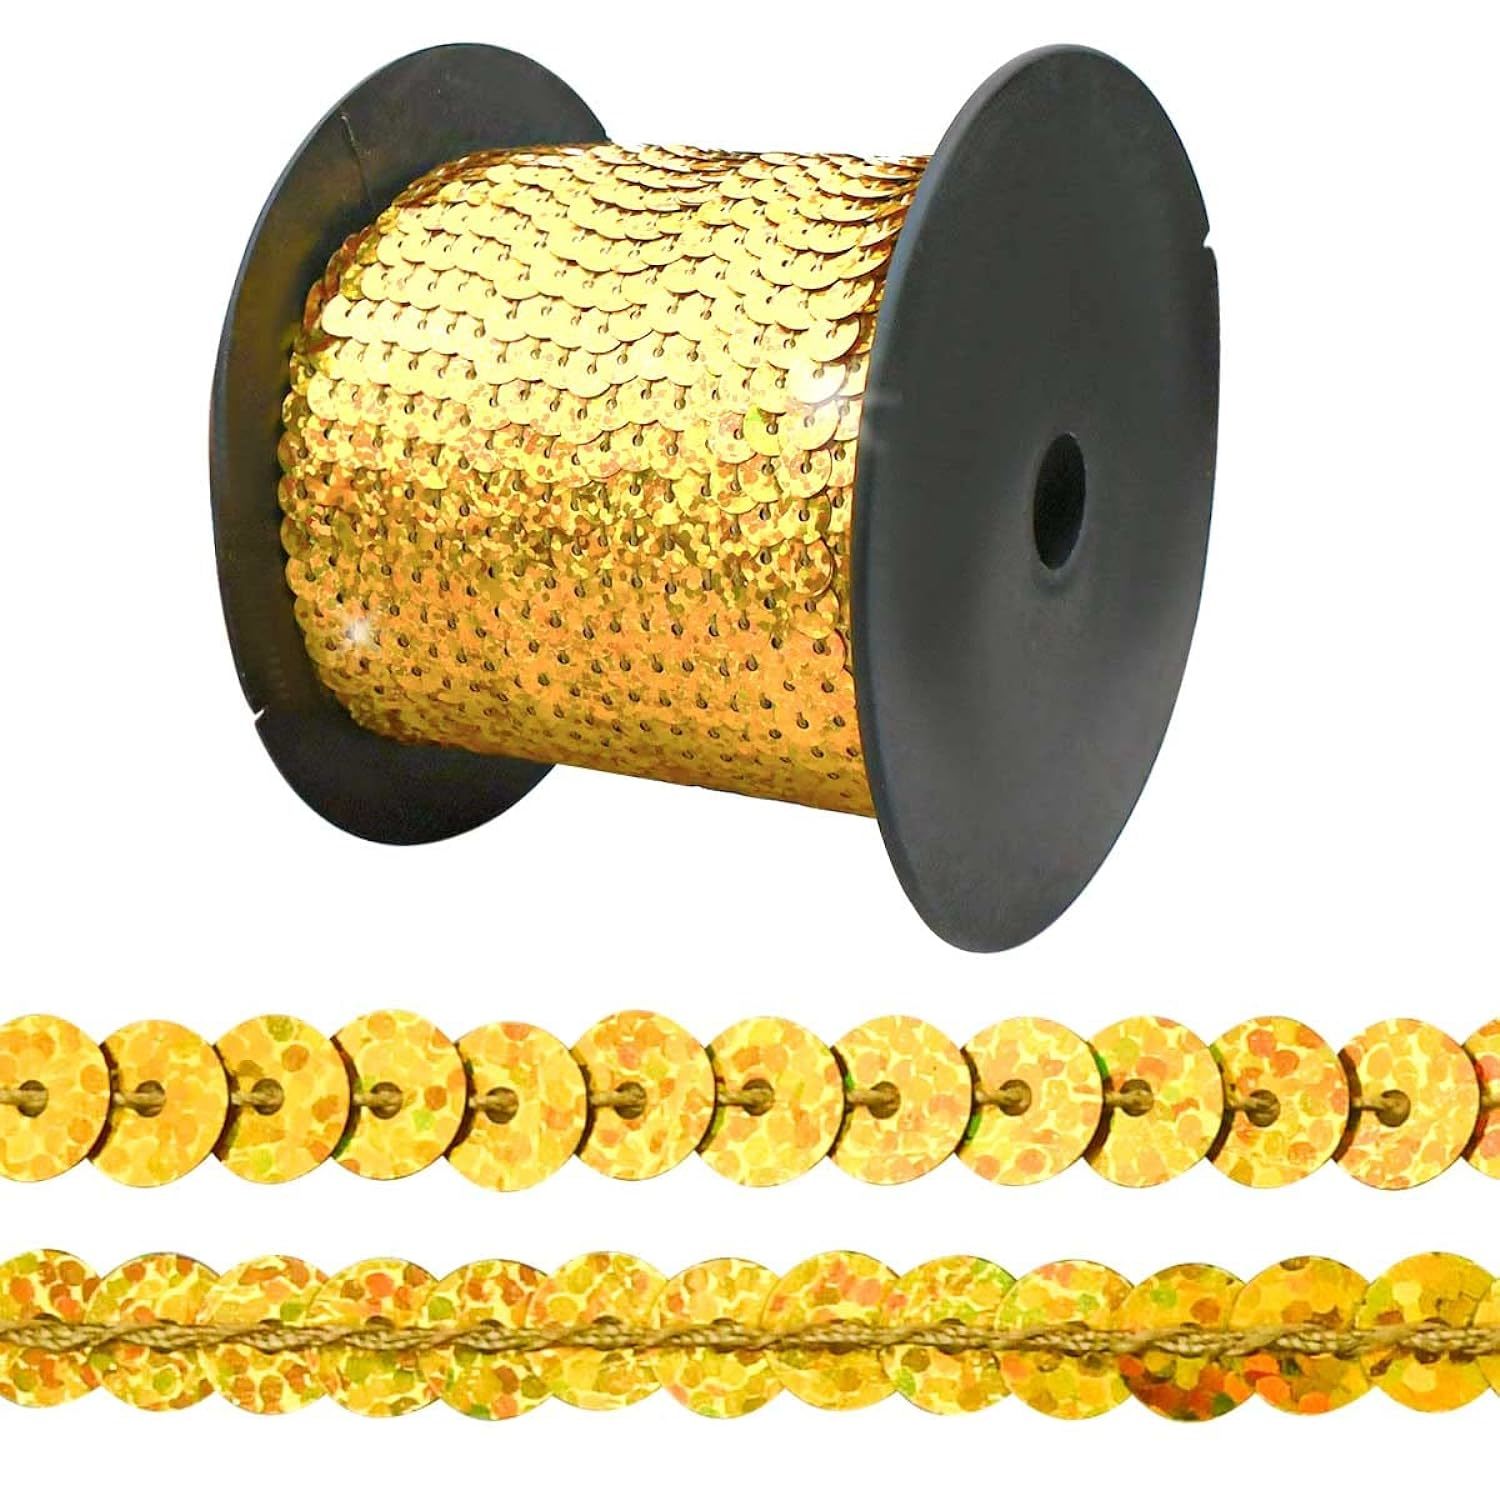 Primary image for 100 Yards Gold Sequin Trim 6Mm Spangle Flat Sequin Strip Fabric Paillette String